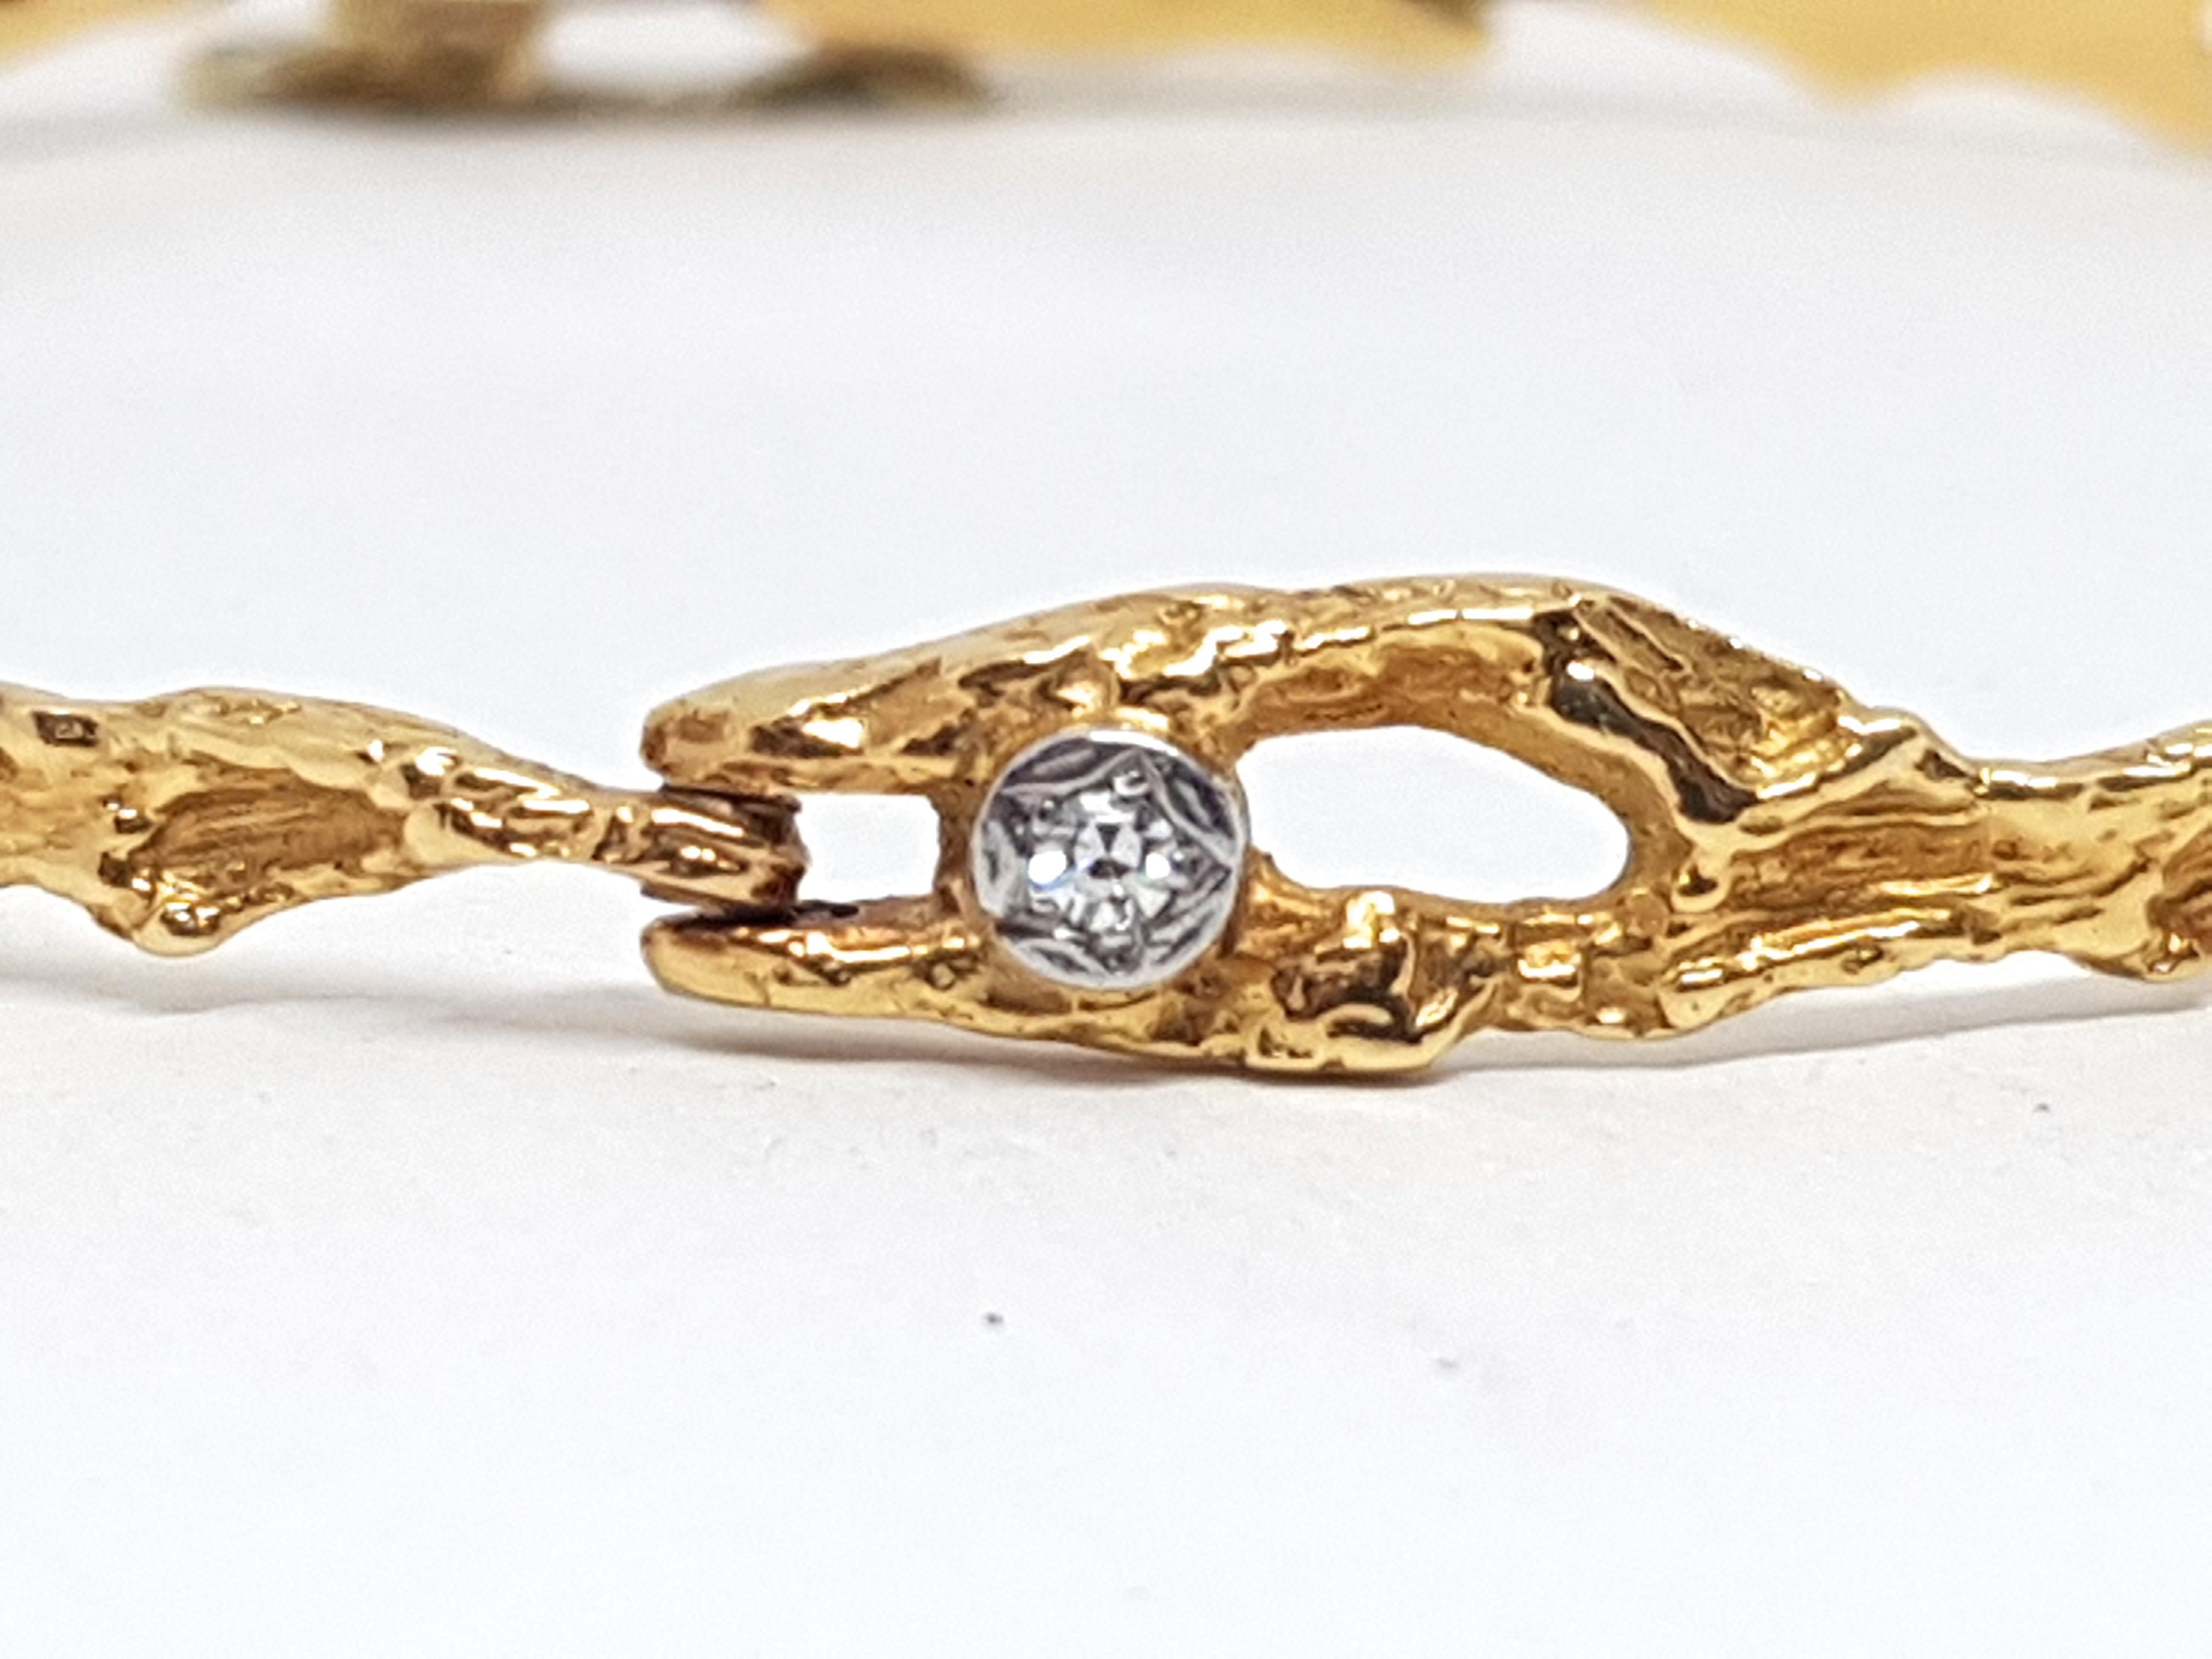 Gold: 18 Karat Yellow Gold 
Weight: 12,71 g 
Diamonds: 0,40 ct. colour: G Clarity: VS1 
Length: 19,0 cm 
Width: 0.6 cm 
All of our jewellery comes with a certificate and a 5-year warranty.
Shipping: free of charge and insured, worldwide. 
Please